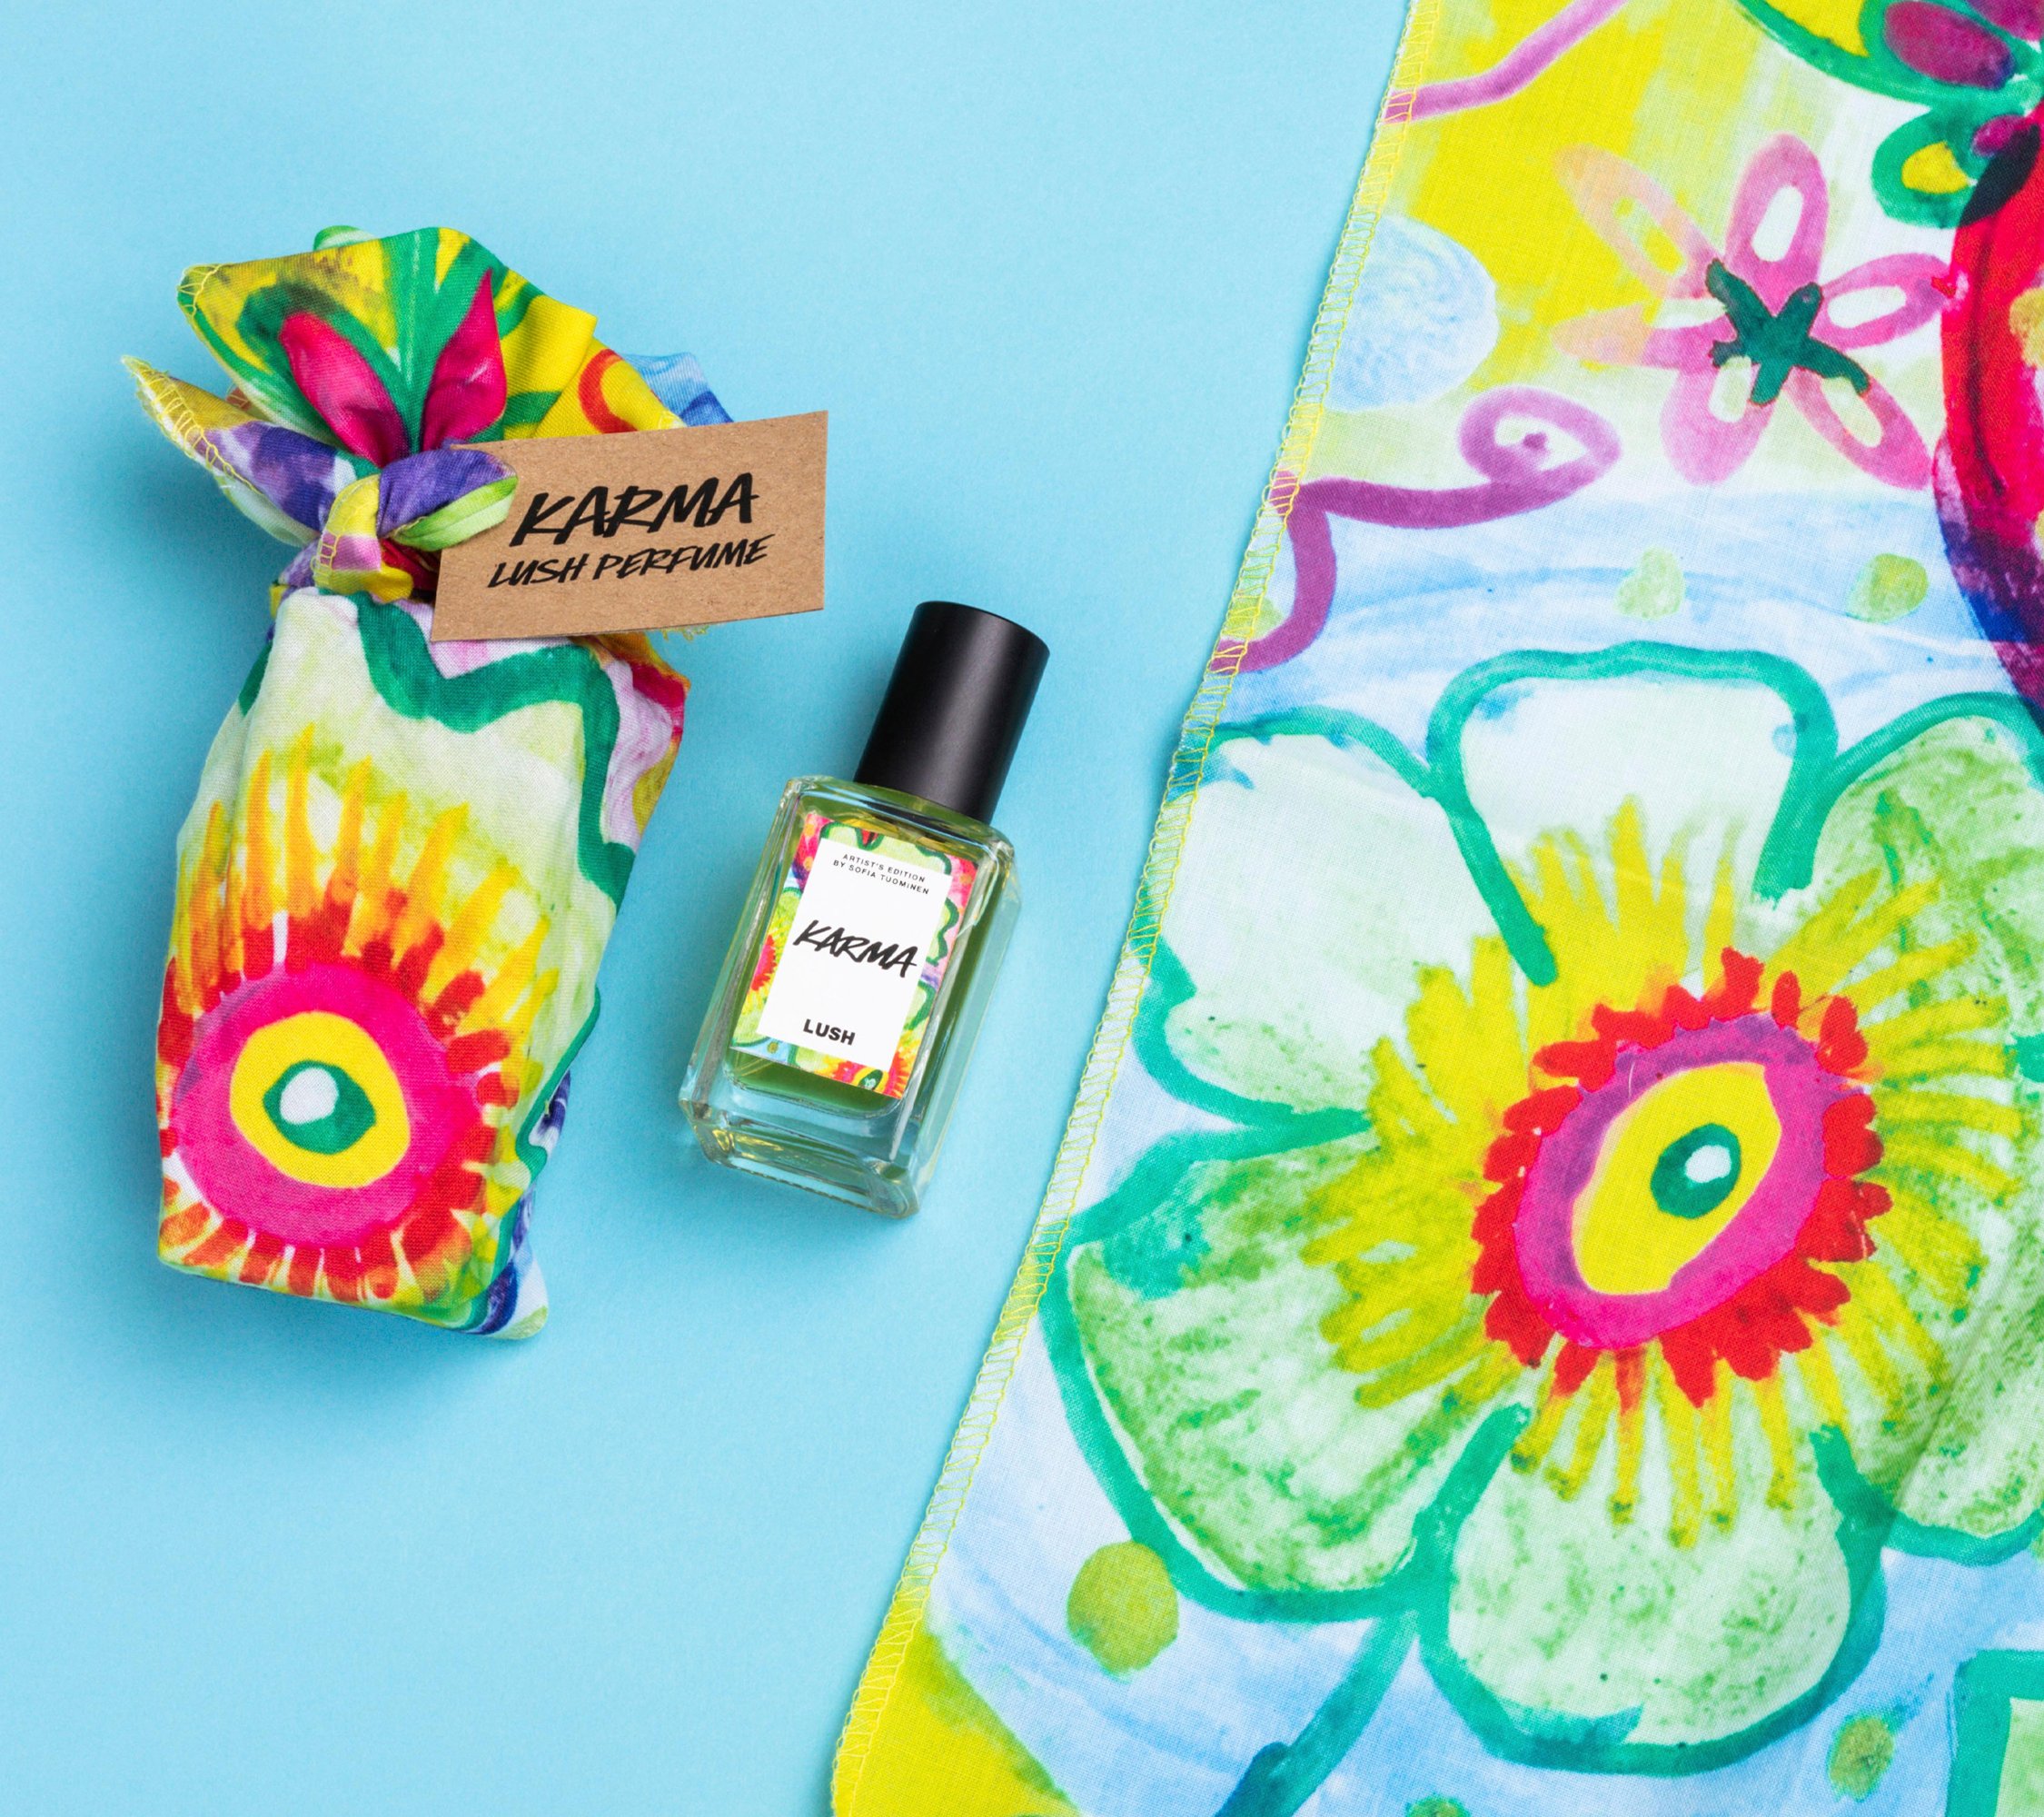 Karma lies on a light blue background, alongside its two elements: a small bottle of Karma perfume and a colourful knot wrap.